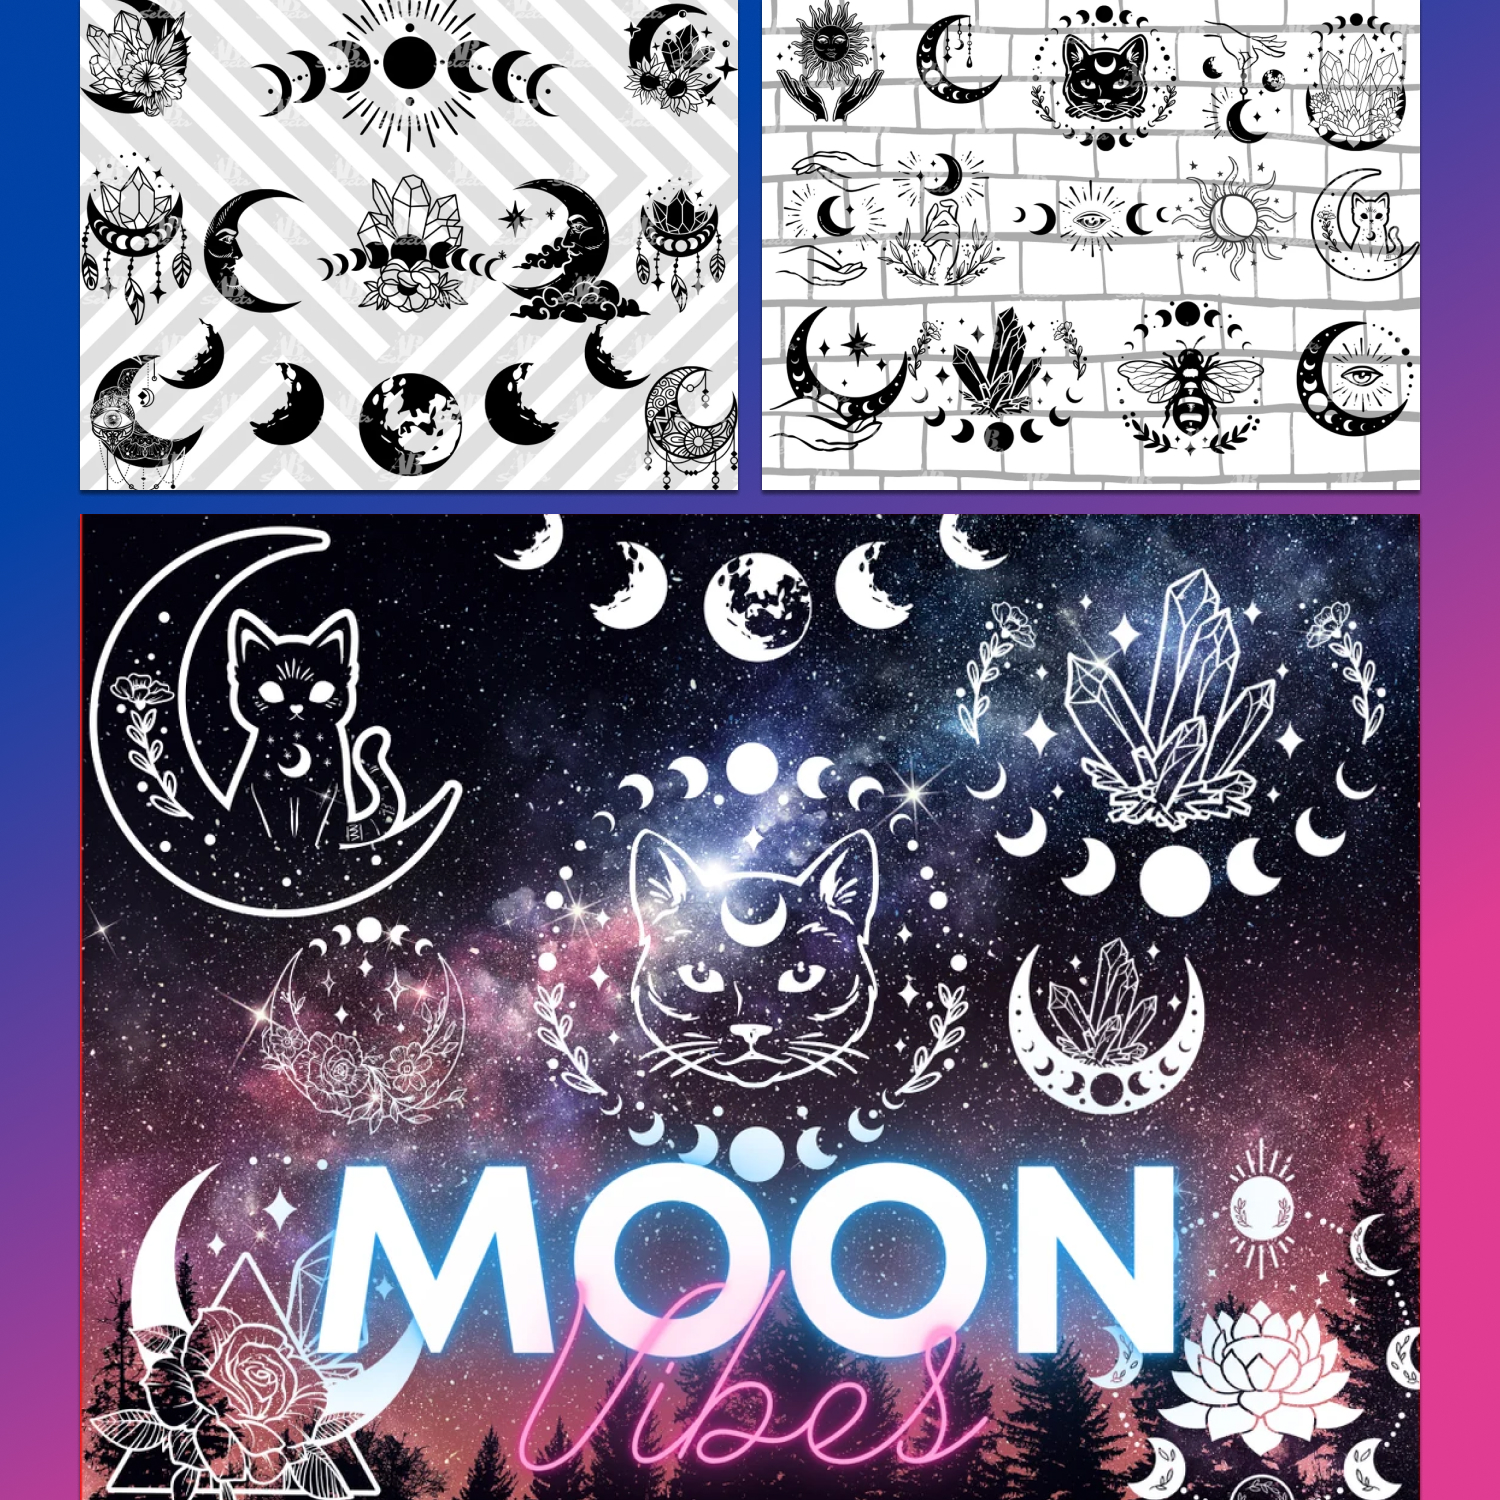 The moon and cats on prints in a magical context.